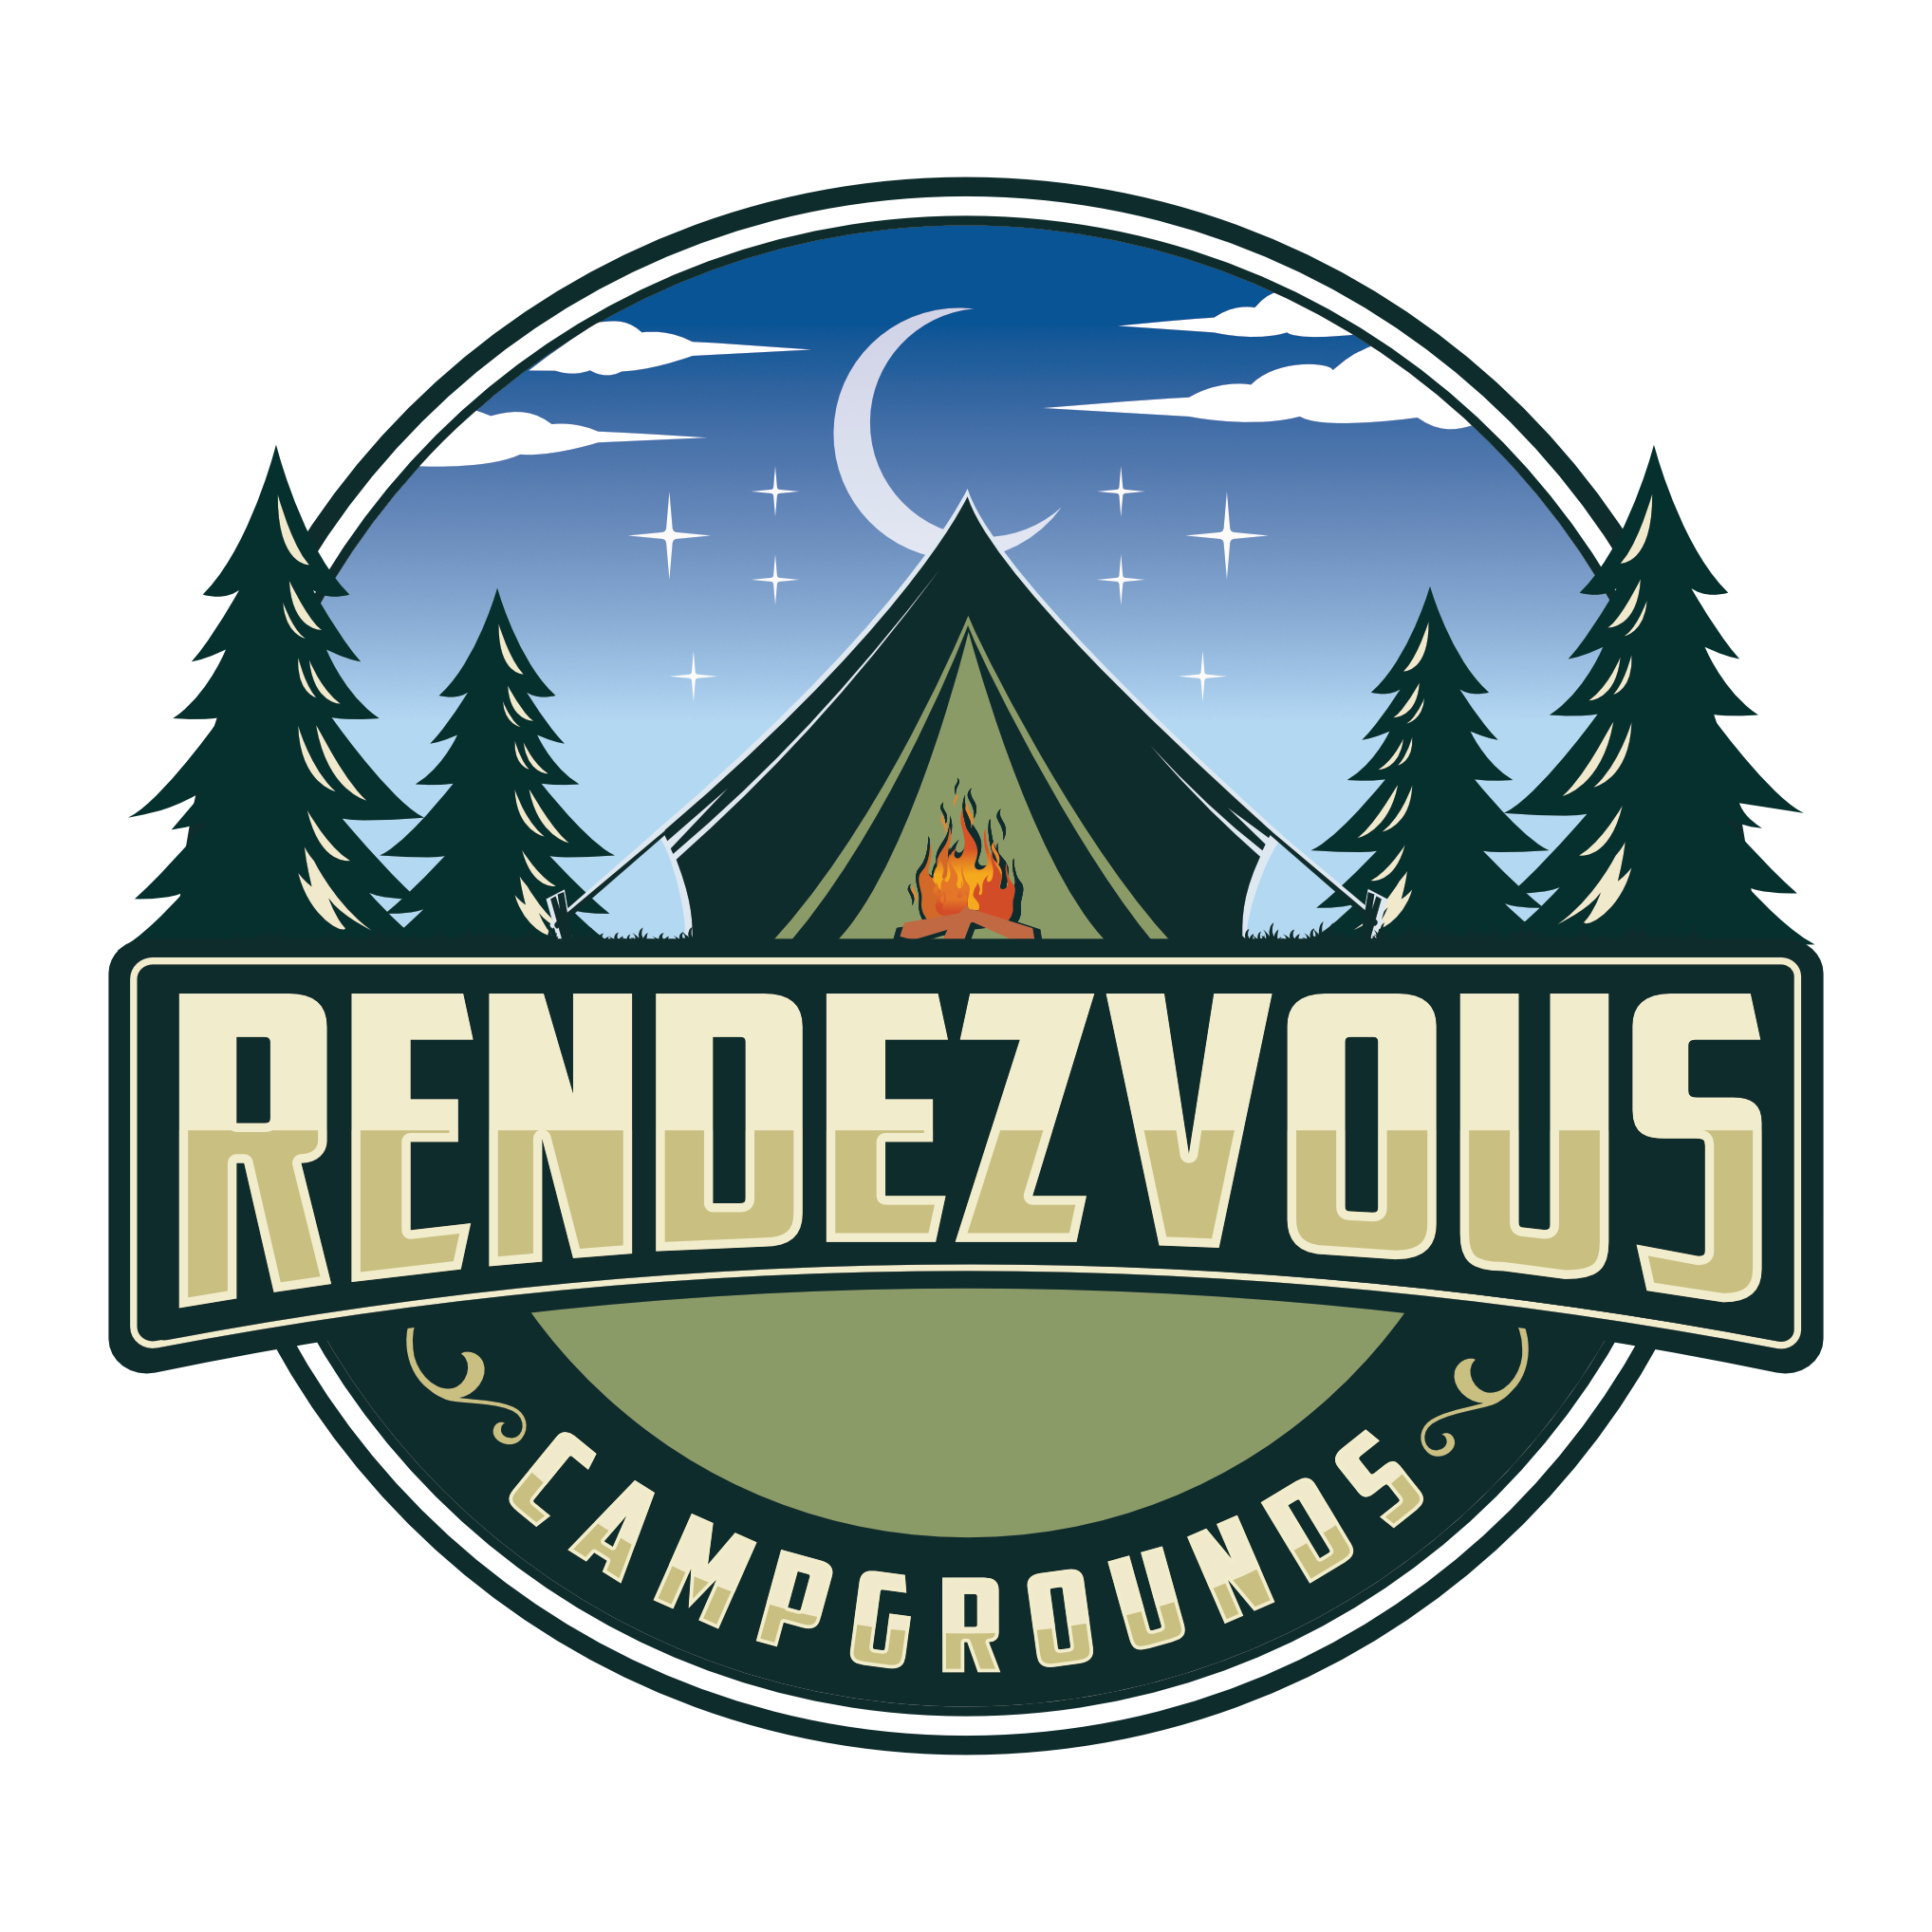 Rendezvous Campgrounds